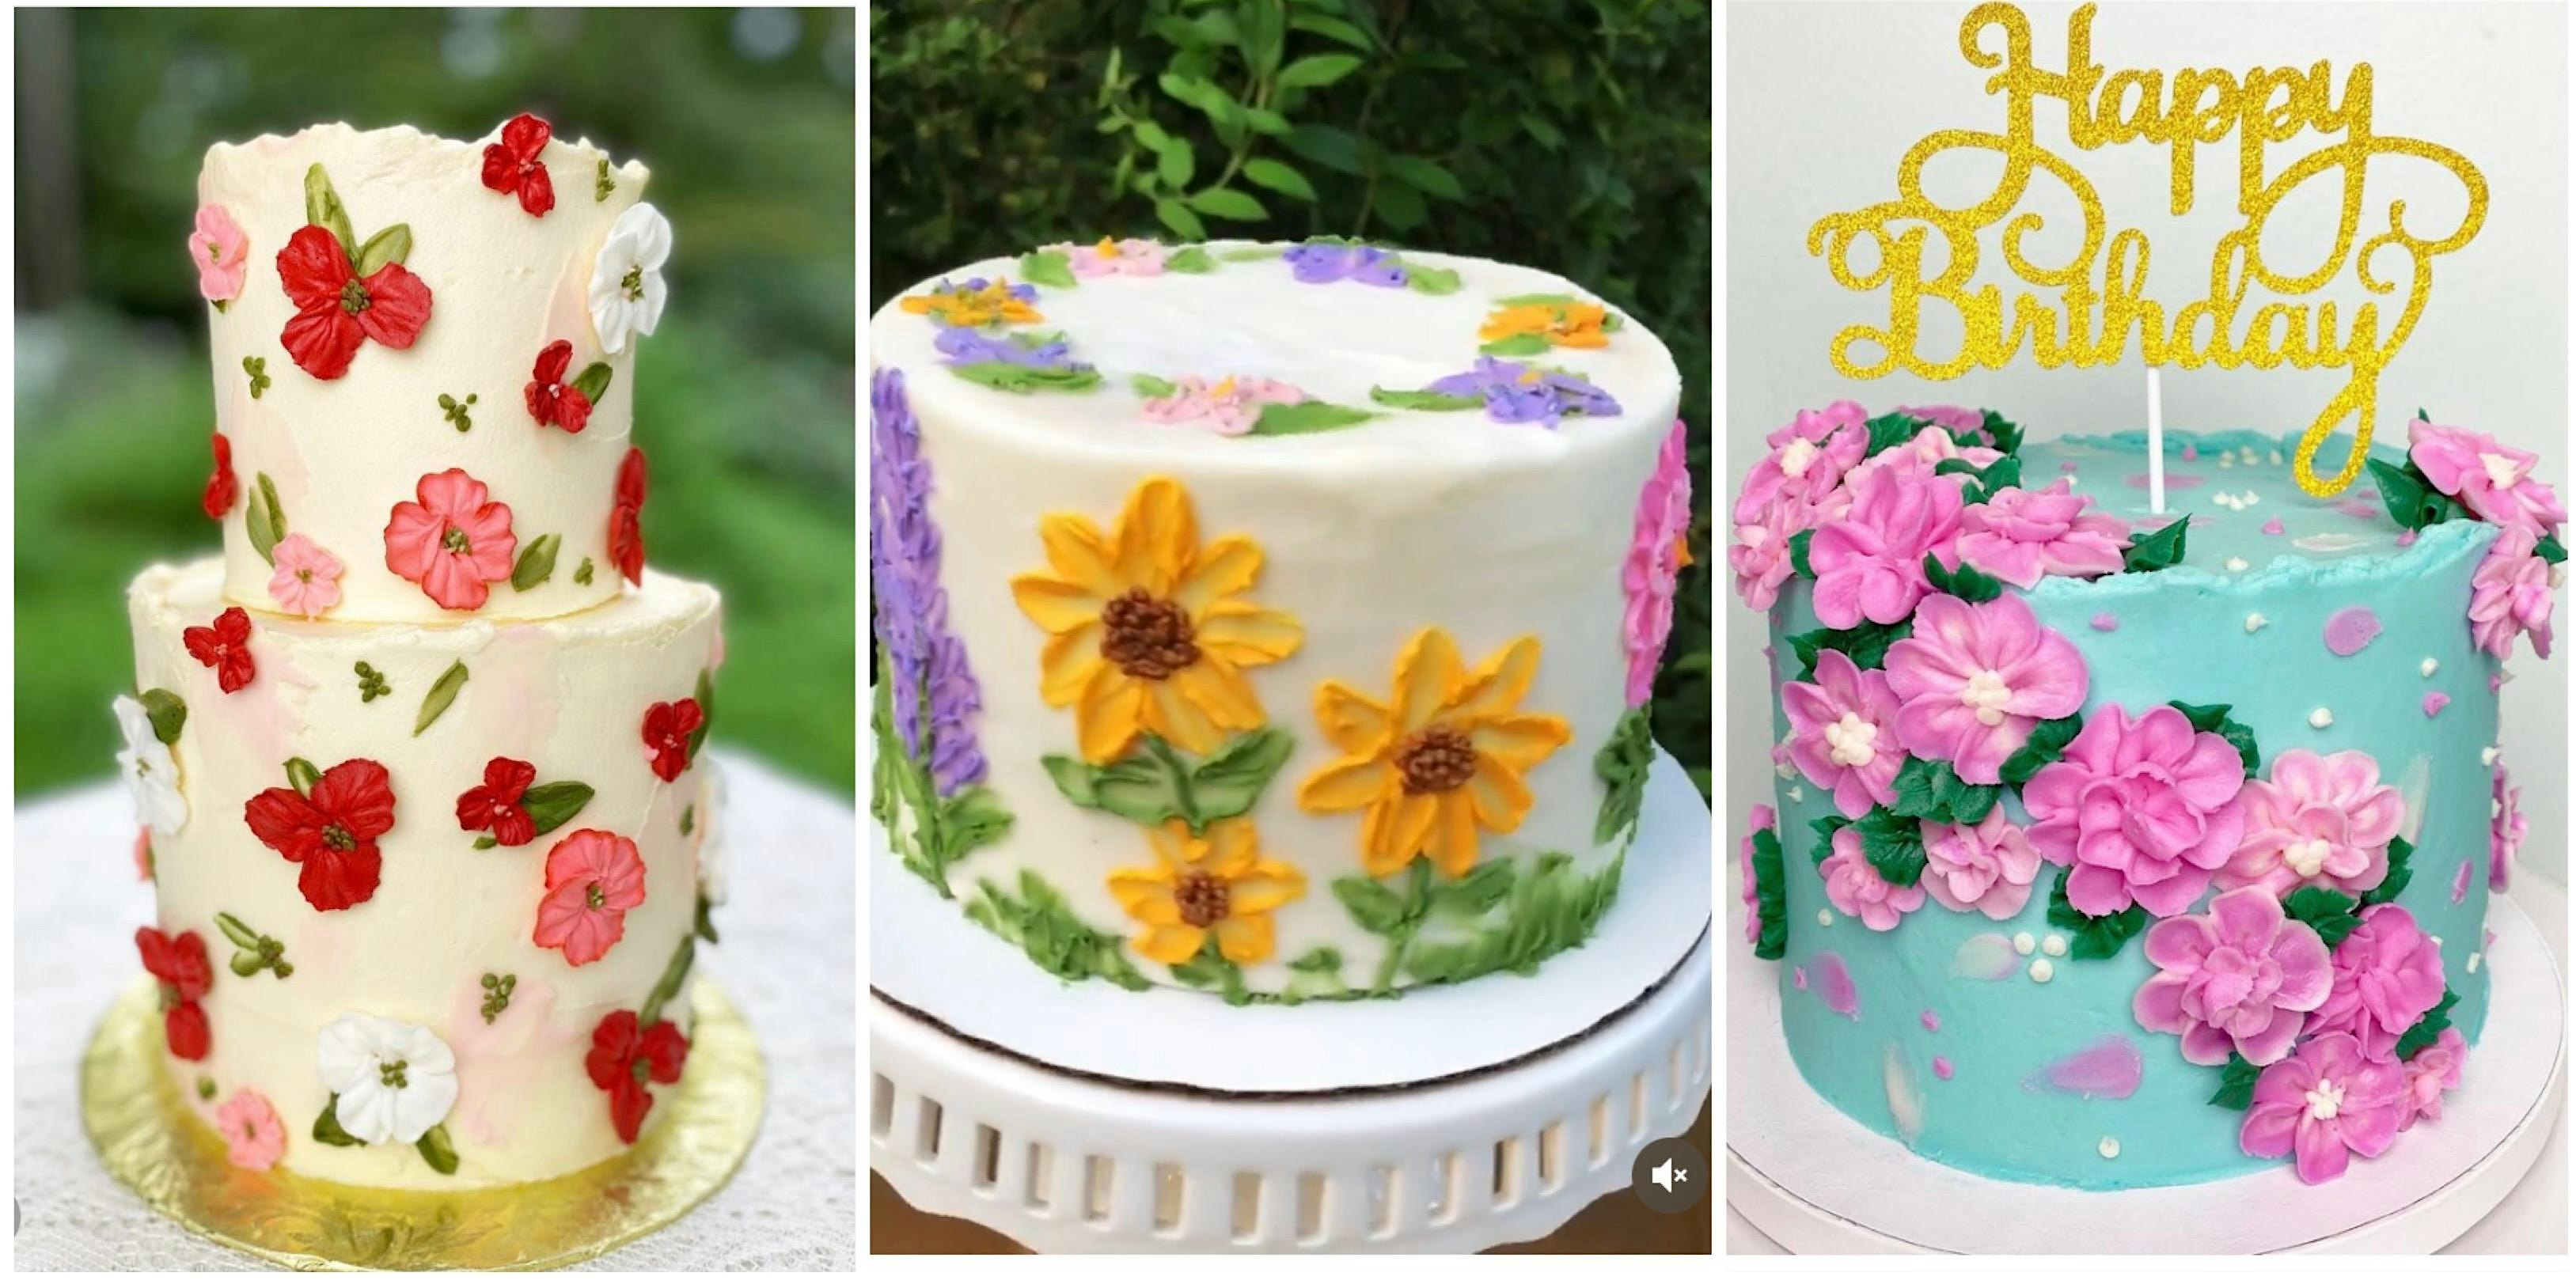 Sunflower Piping and Sculpting Cake Decorating Class